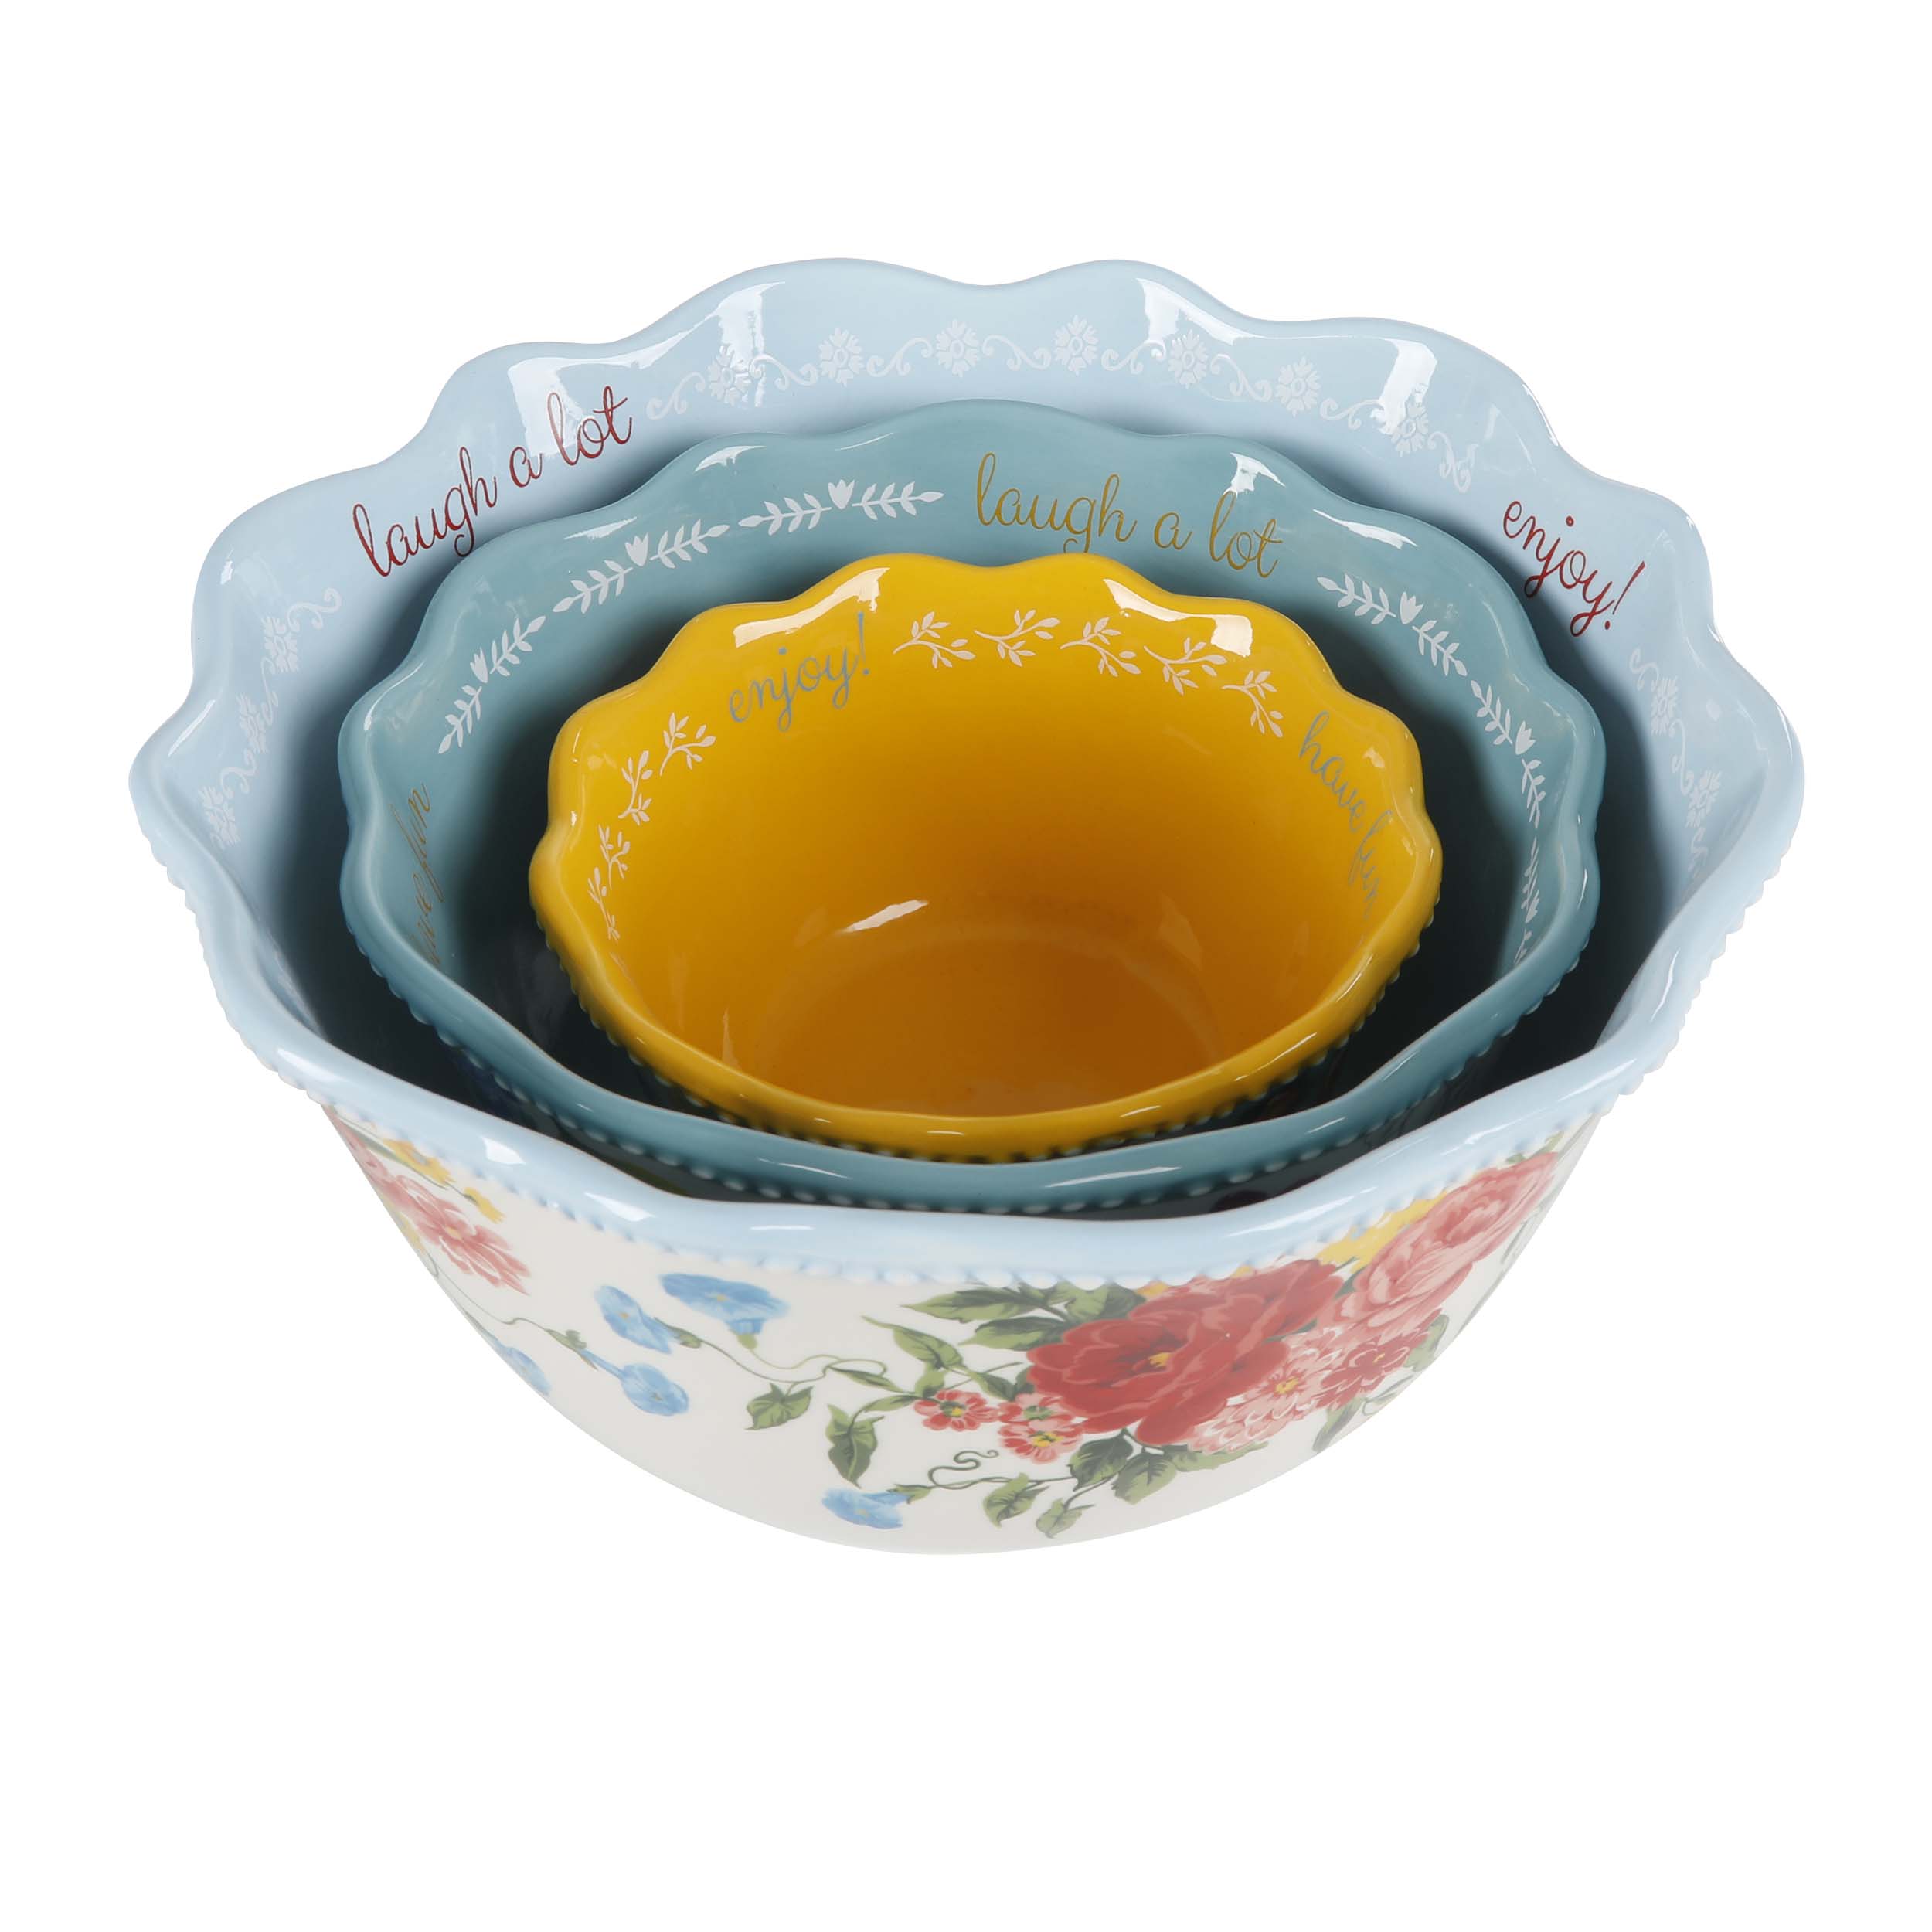 The Pioneer Woman Sweet Rose Sentiment Serving Bowls, 3-Piece Set - image 5 of 6